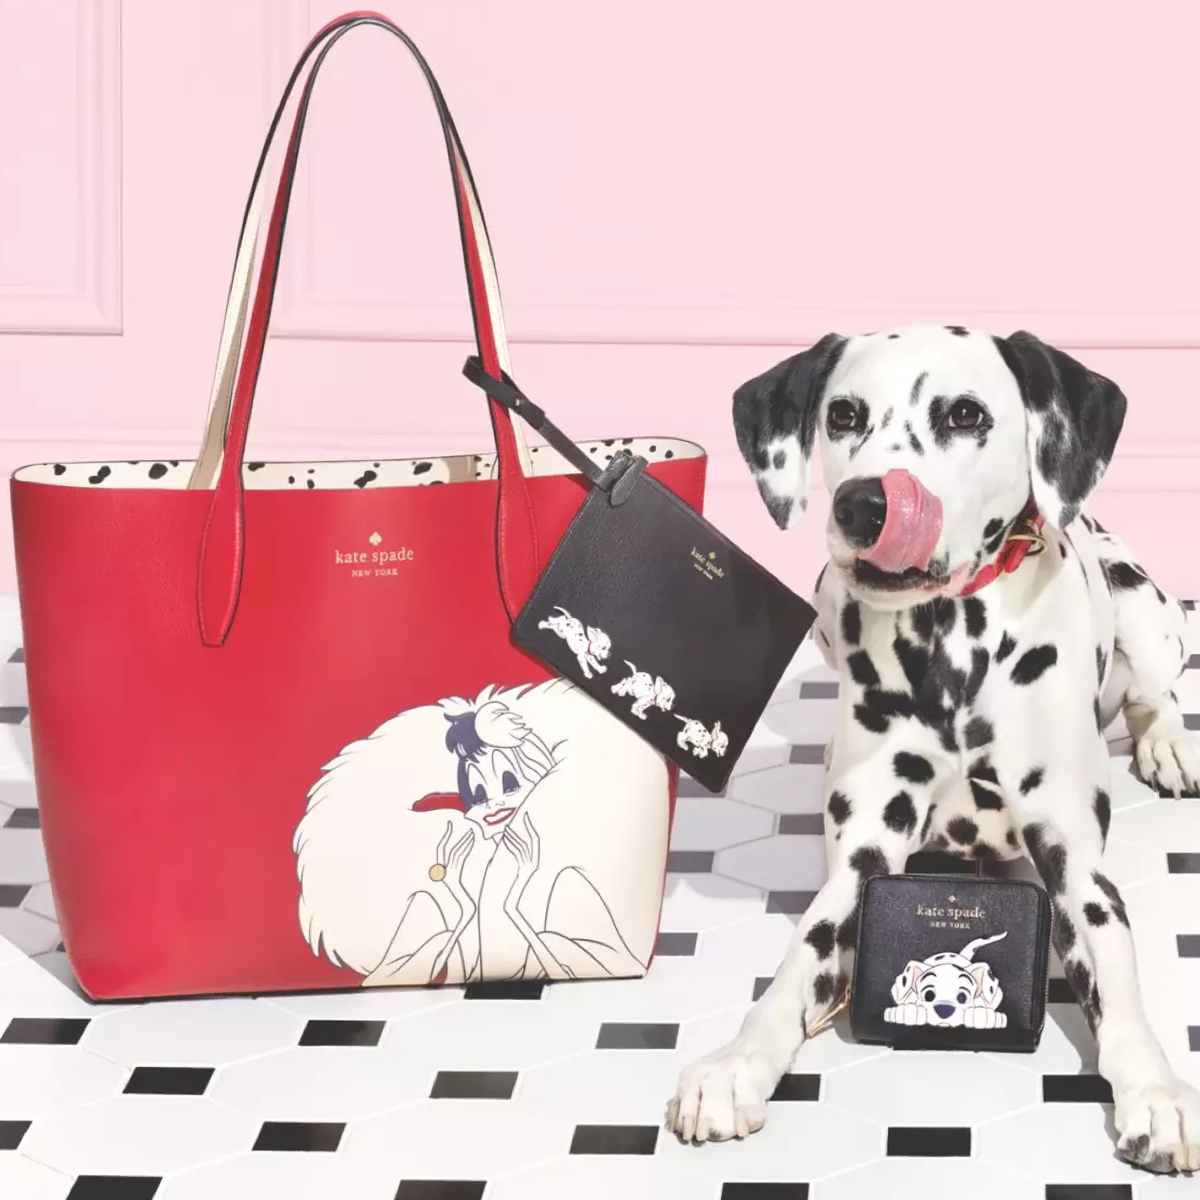 Kate Spade Surprise sale: Save 75% and an extra 20% off purses